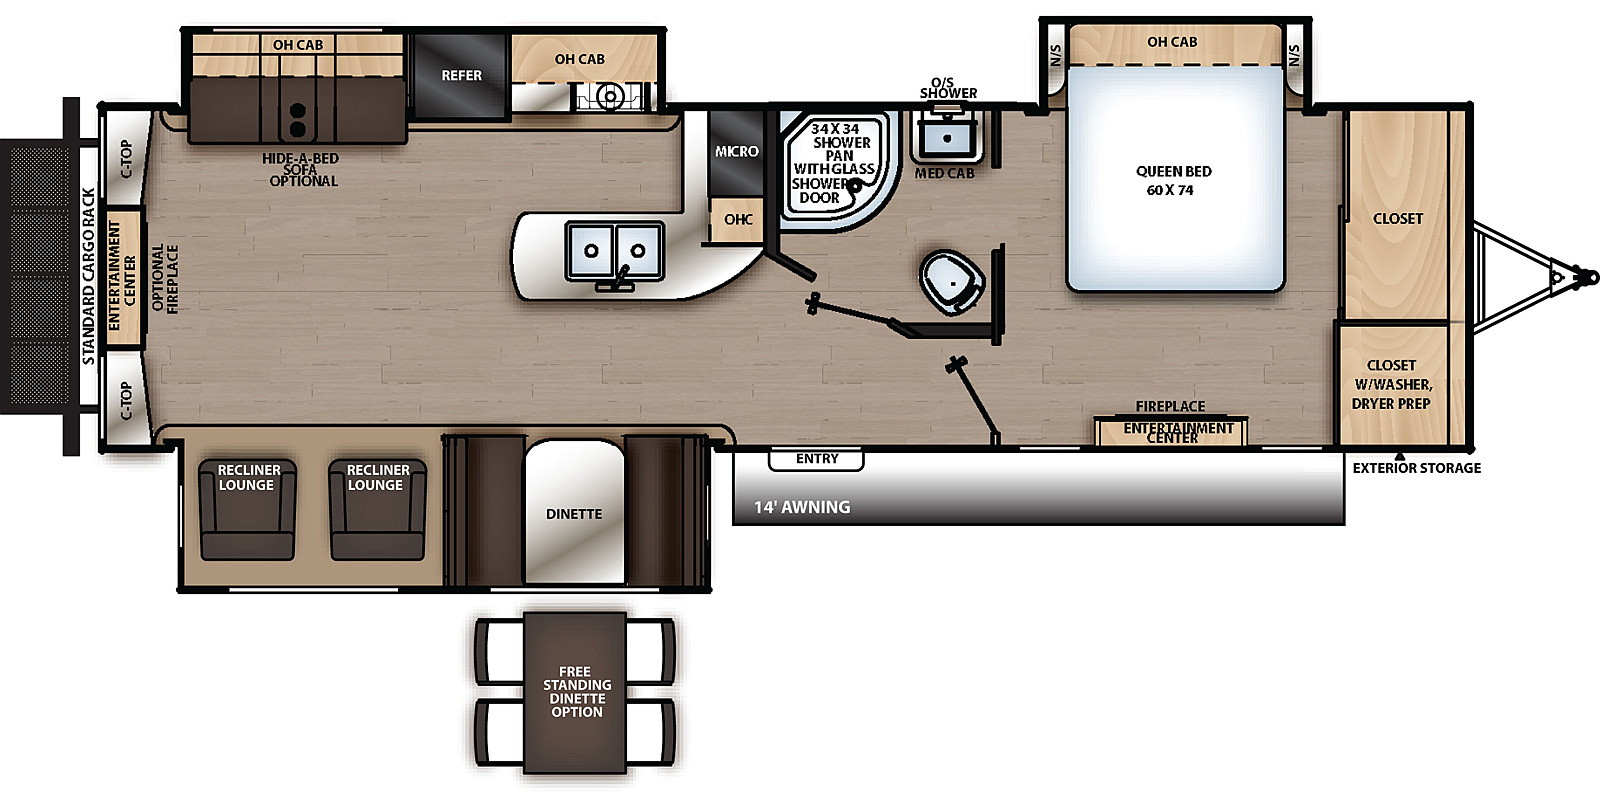 The 333RETS has three slide outs two on the off-door side and one on the door side and one entry door on the door side. Interior layout from front to back: front bedroom with closet, off-door side slide out containing side facing queen bed and overhead cabinet, and door side entertainment center with fireplace; off- door side bathroom; door side slide out containing dinette and recliners; off-door side slide out containing cook top stove, overhead cabinet, refrigerator, sofa, and overhead cabinet; off-door side countertop with microwave cabinet, overhead cabinet, and double basin sink; and rear entertainment center with countertops on either side.